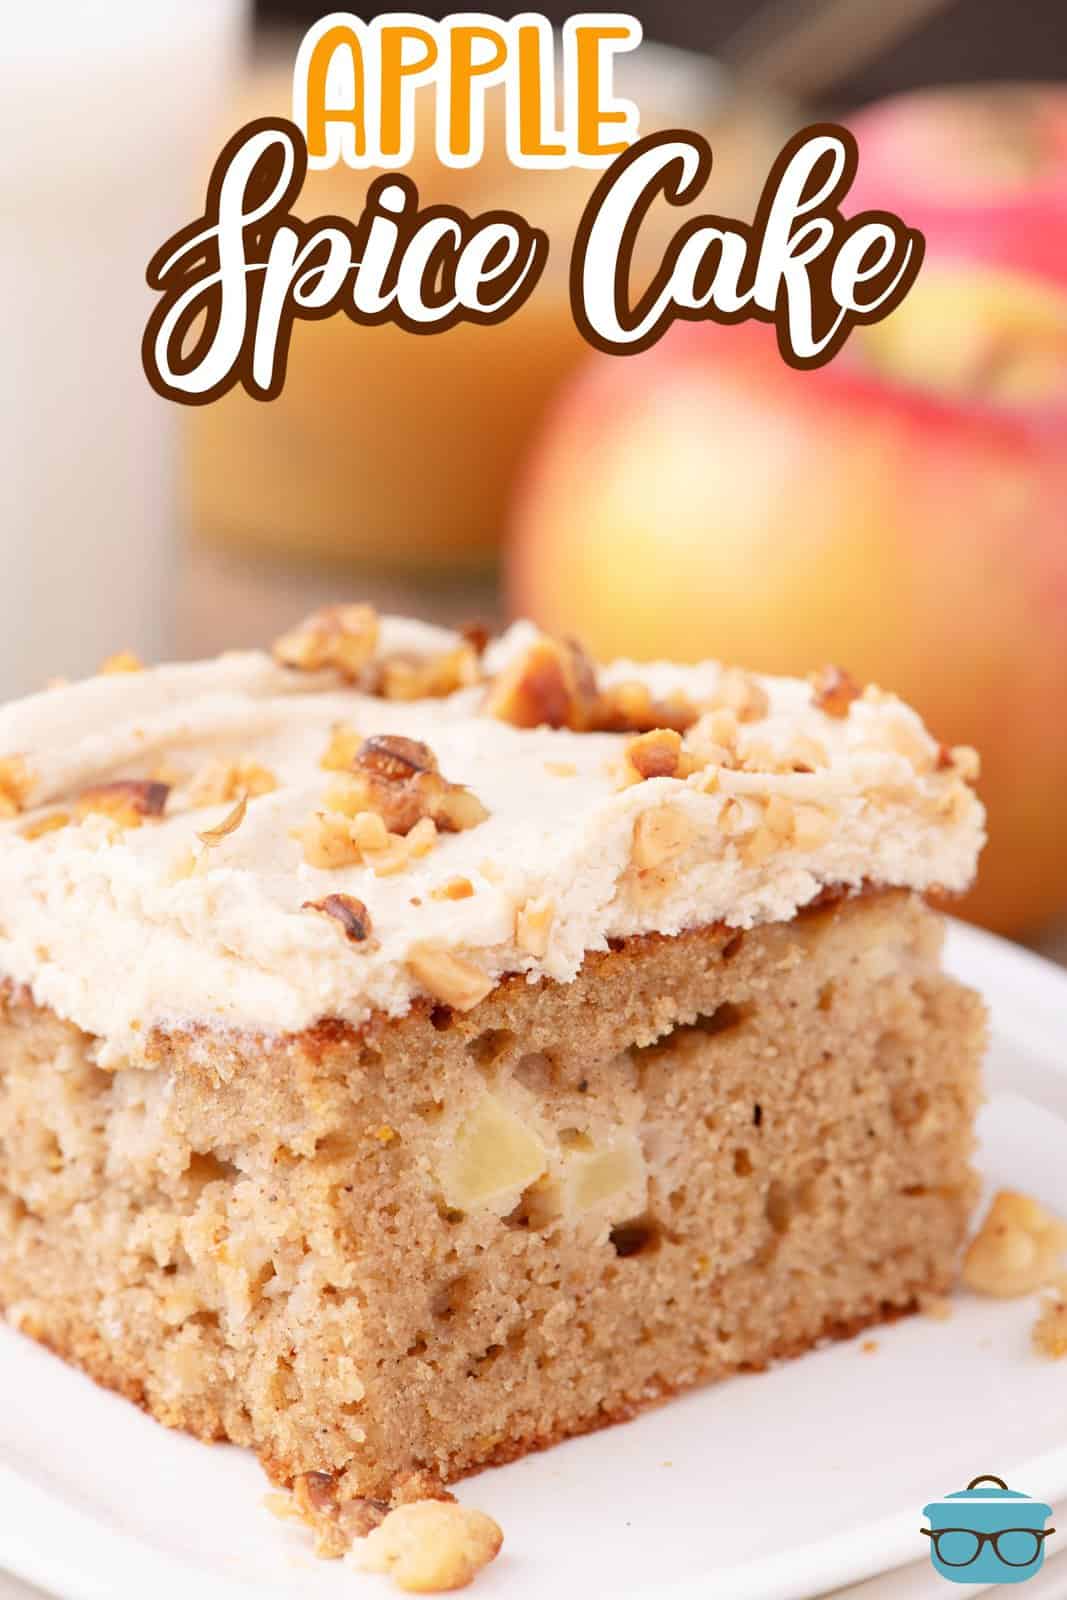 A slice of homemade Apple Spice Cake with homemade brown sugar frosting and nuts on top.